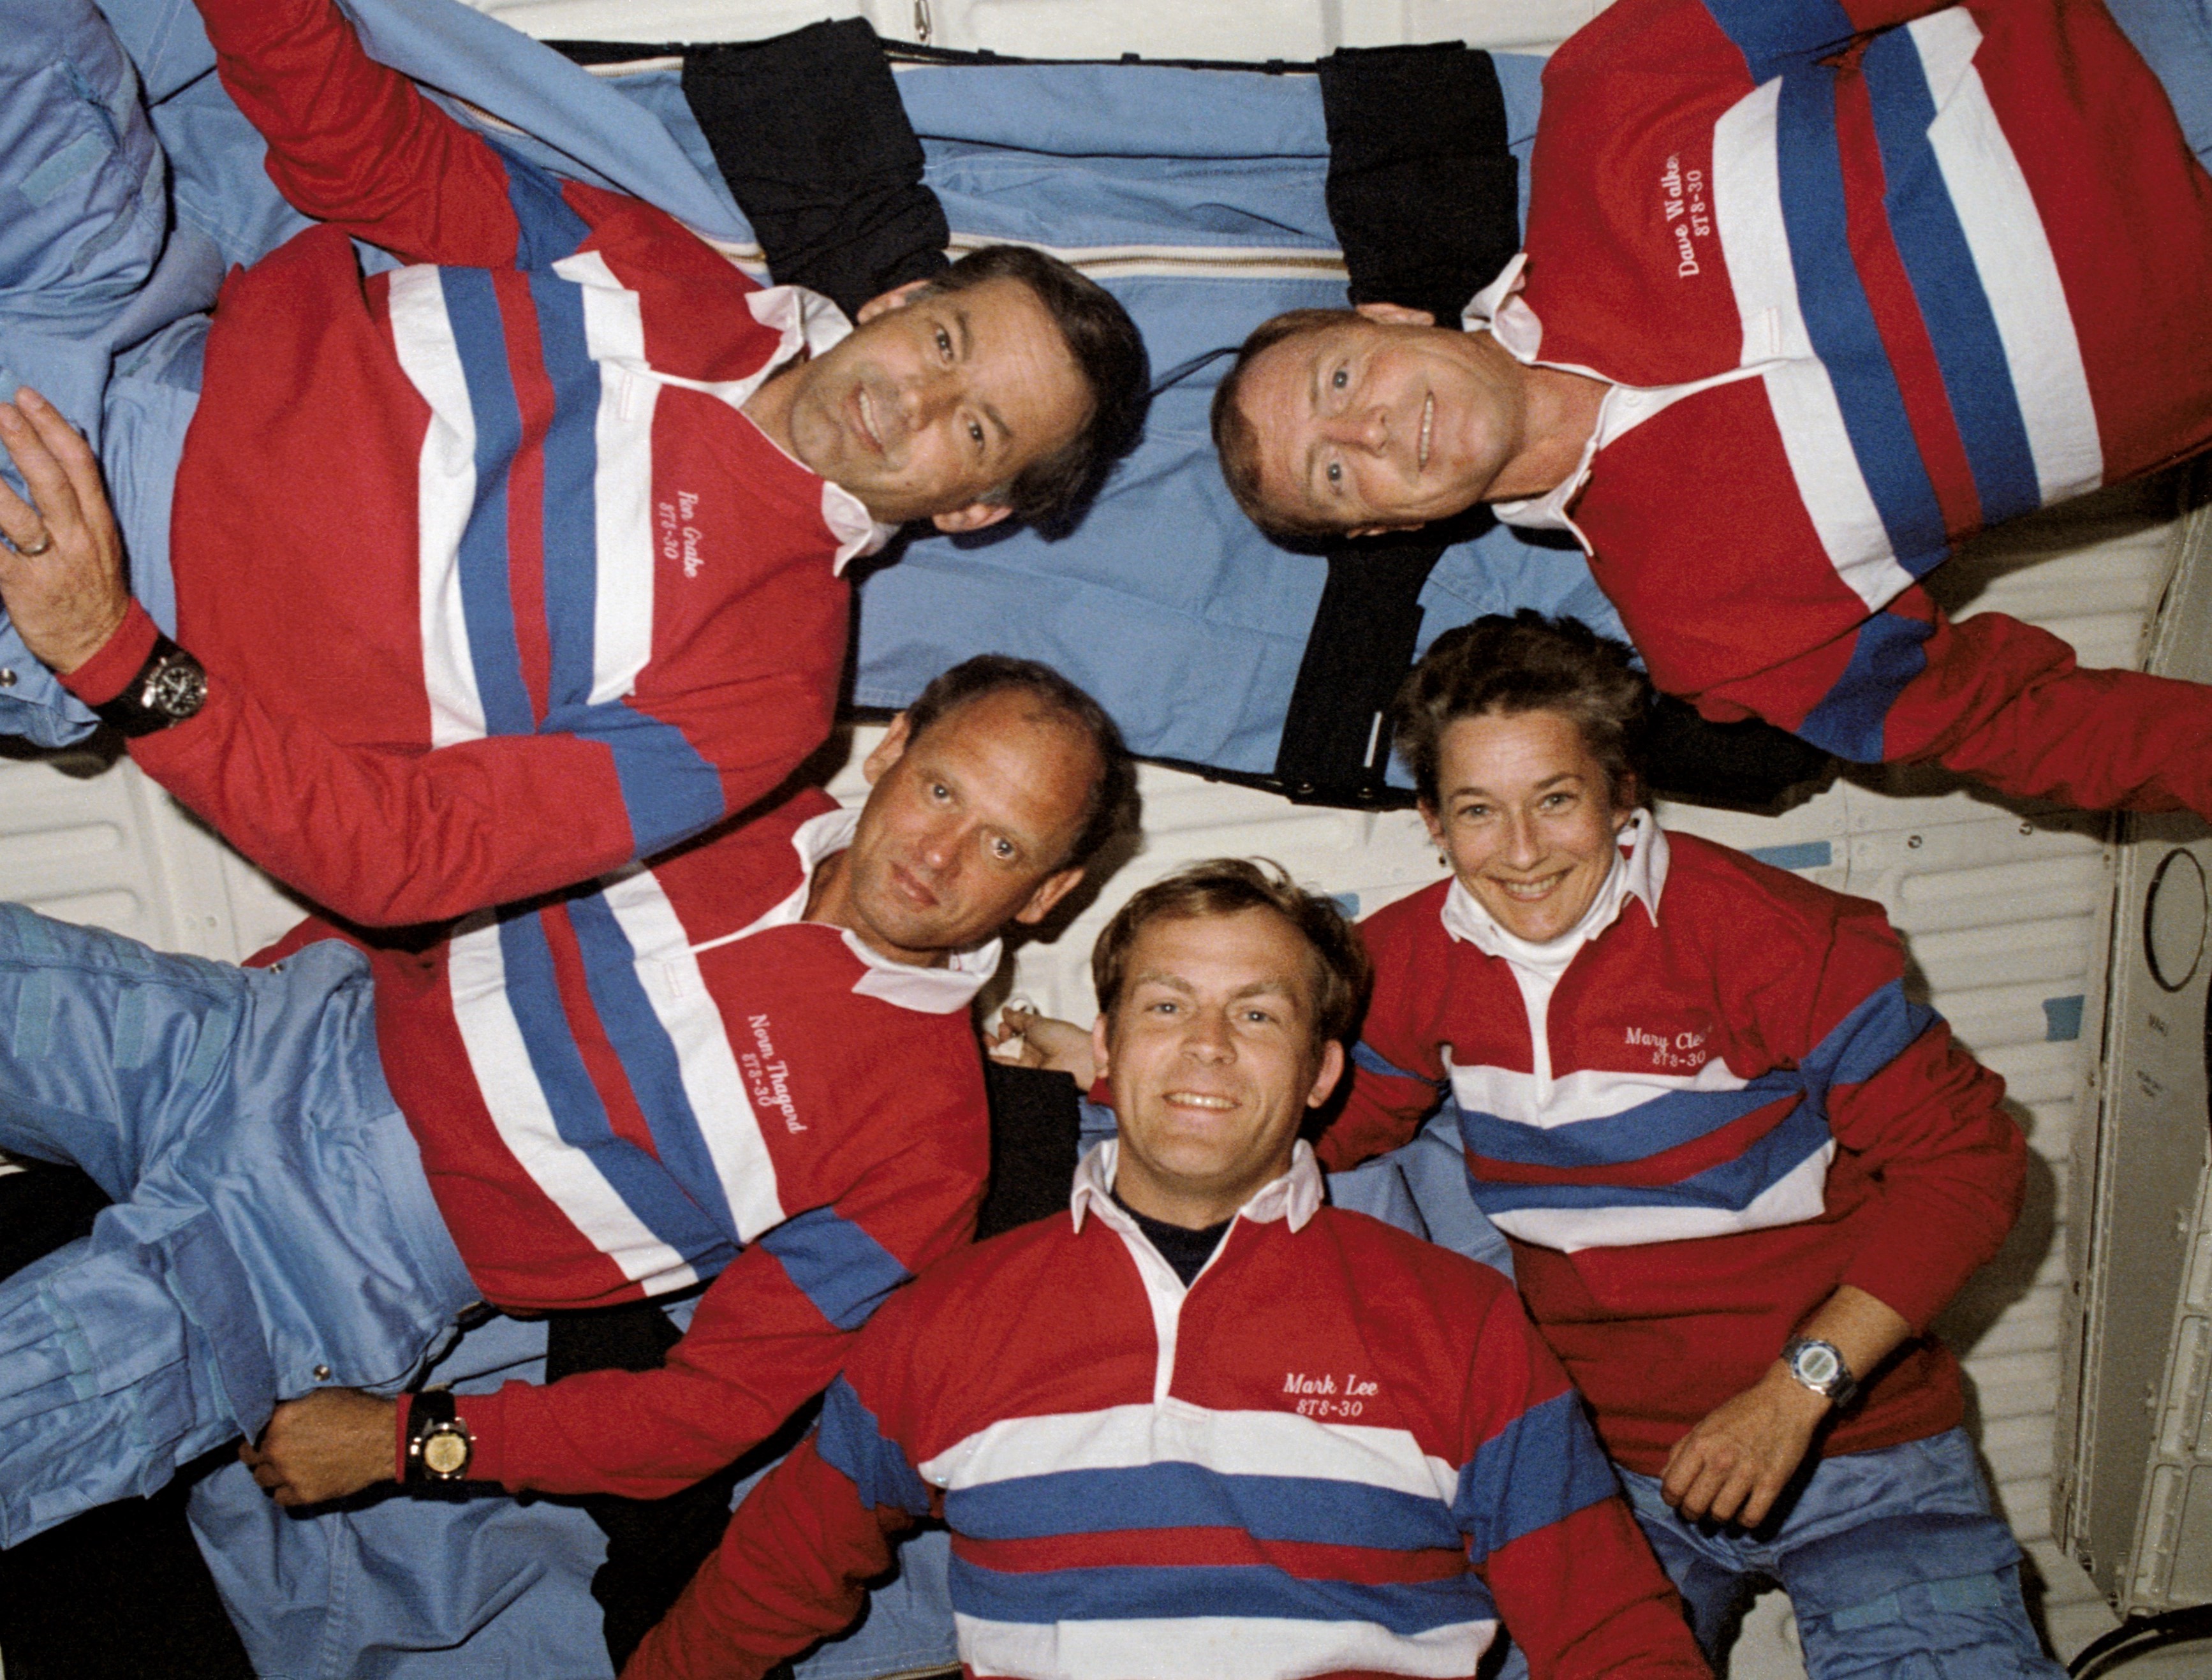 Inflight photograph of the STS-30 crew